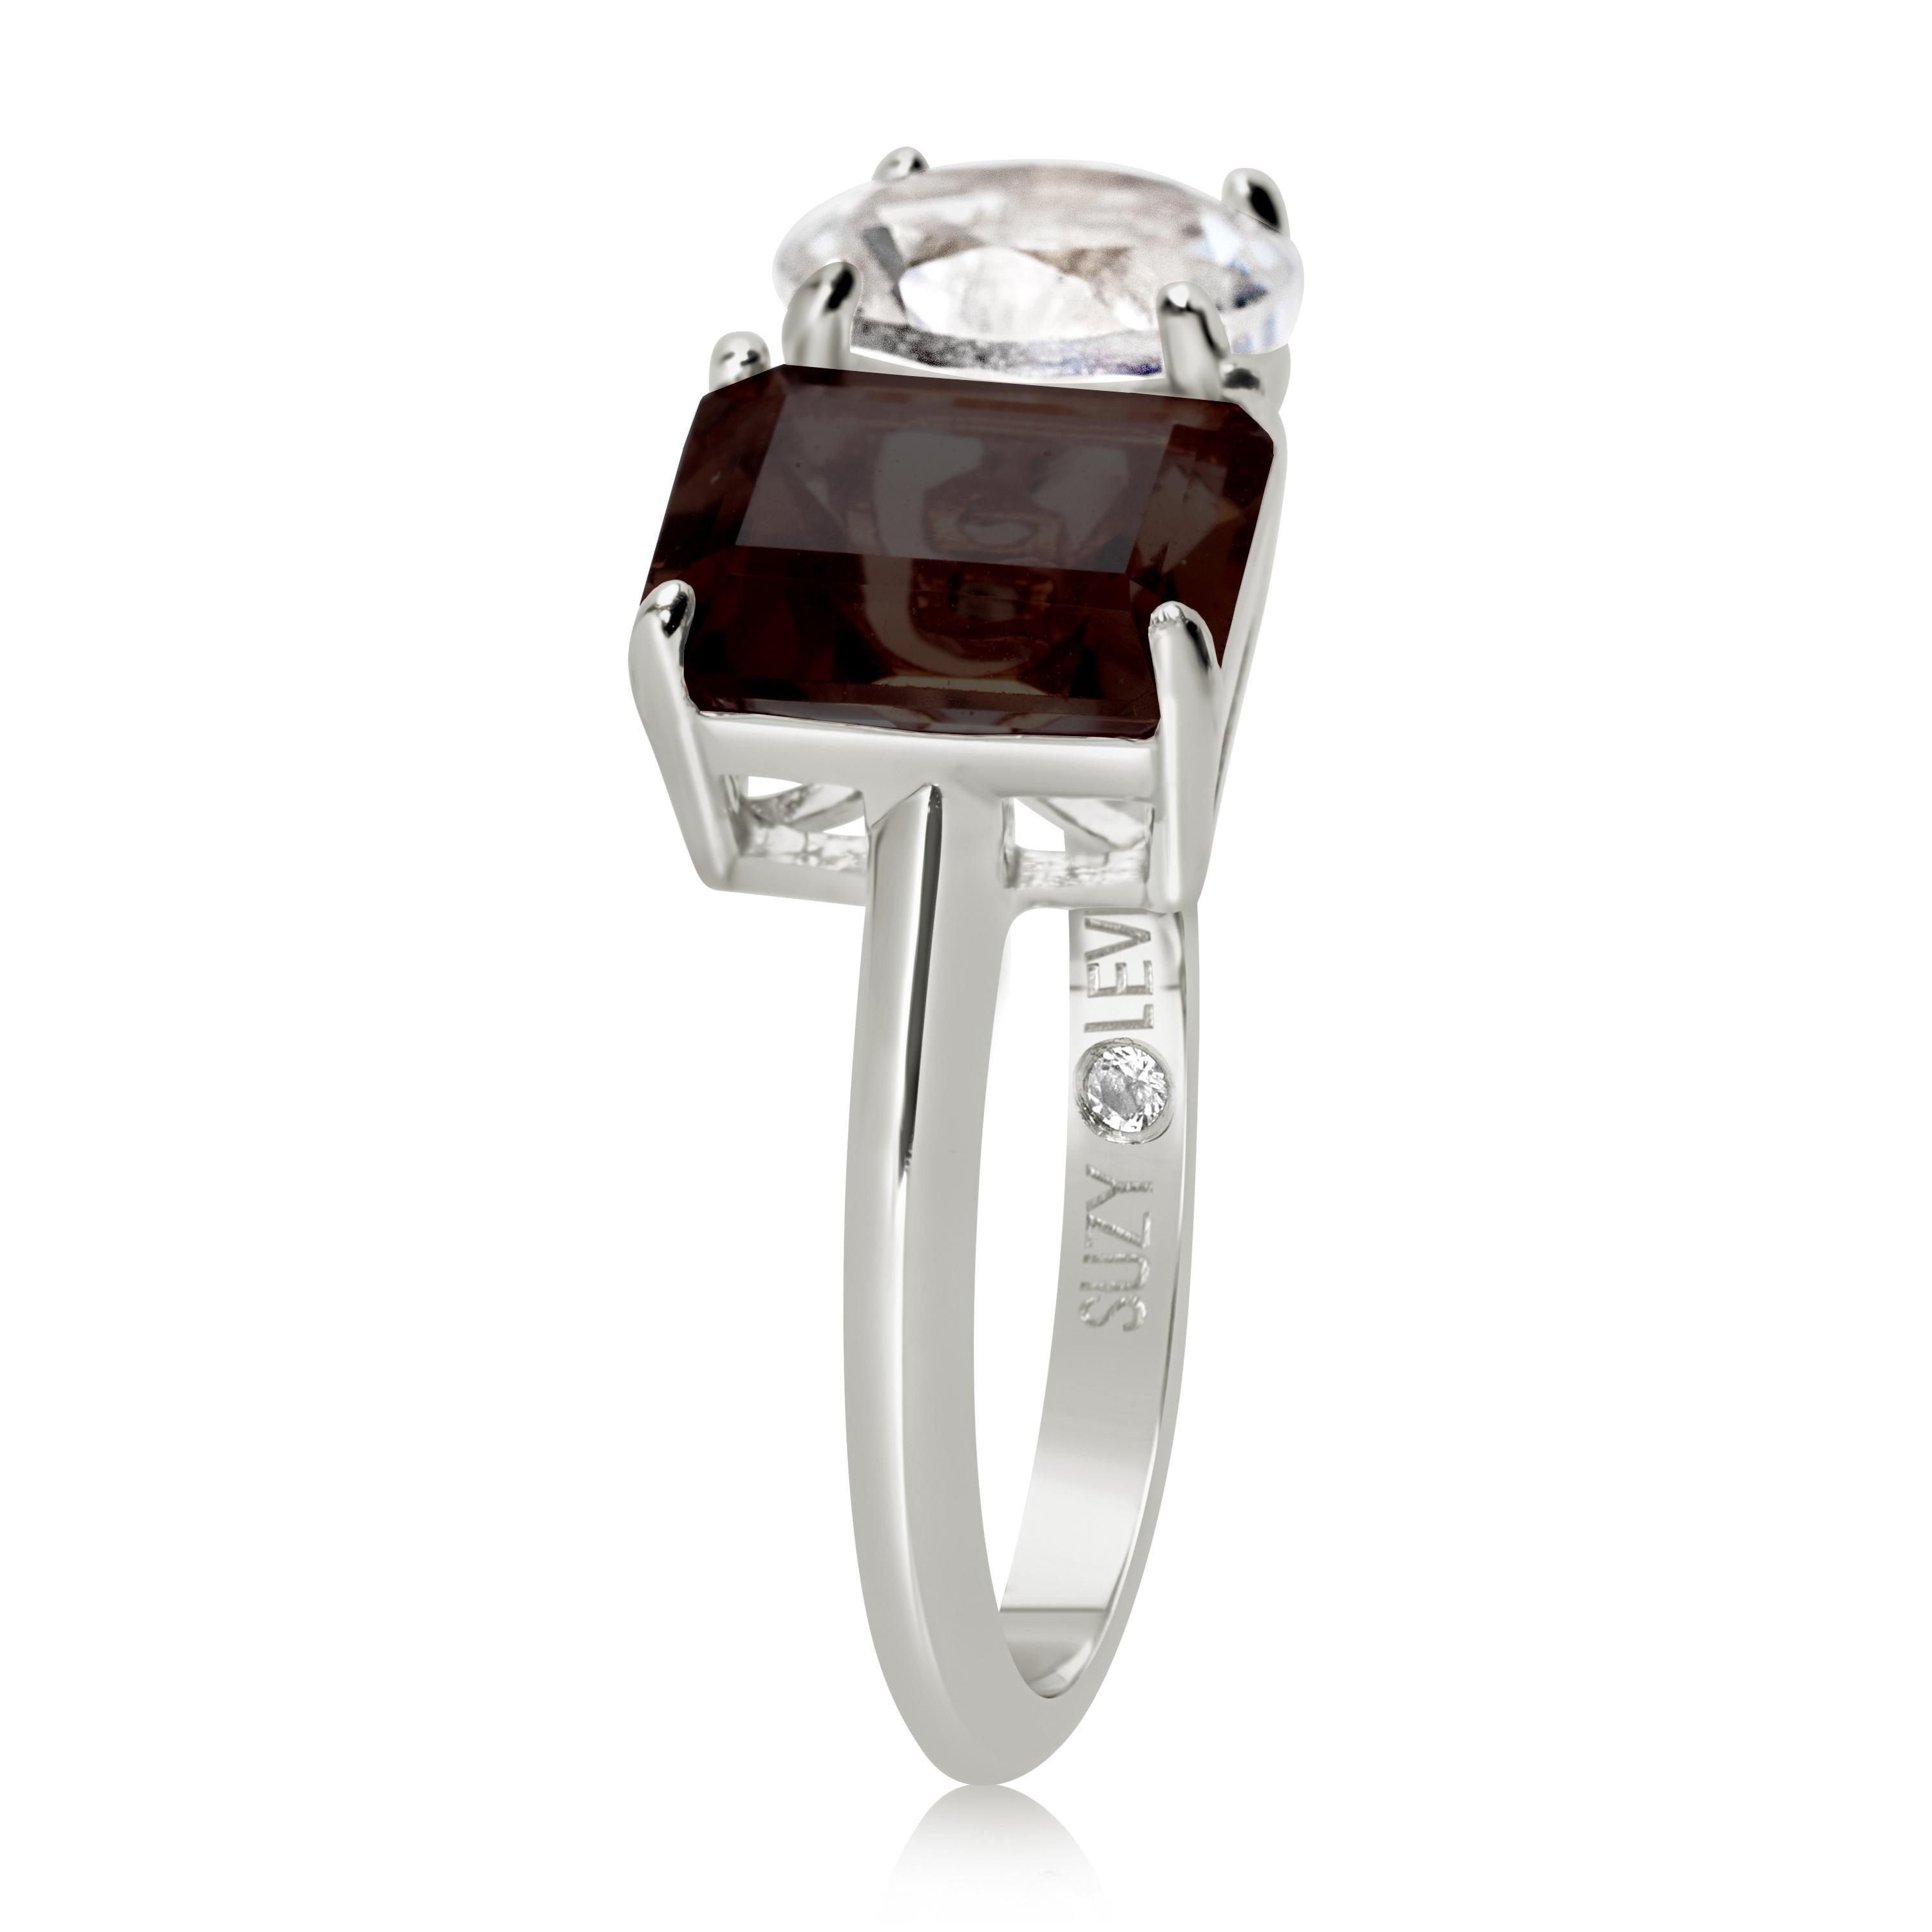 Shimmering in hues of white and brown, this Suzy Levian ring is as on trend as can be, and features a round cut white topaz and an emerald cut smoky quartz as a perfectly matched pair. This ring symbolizes a perfect pairing of unique shapes. This